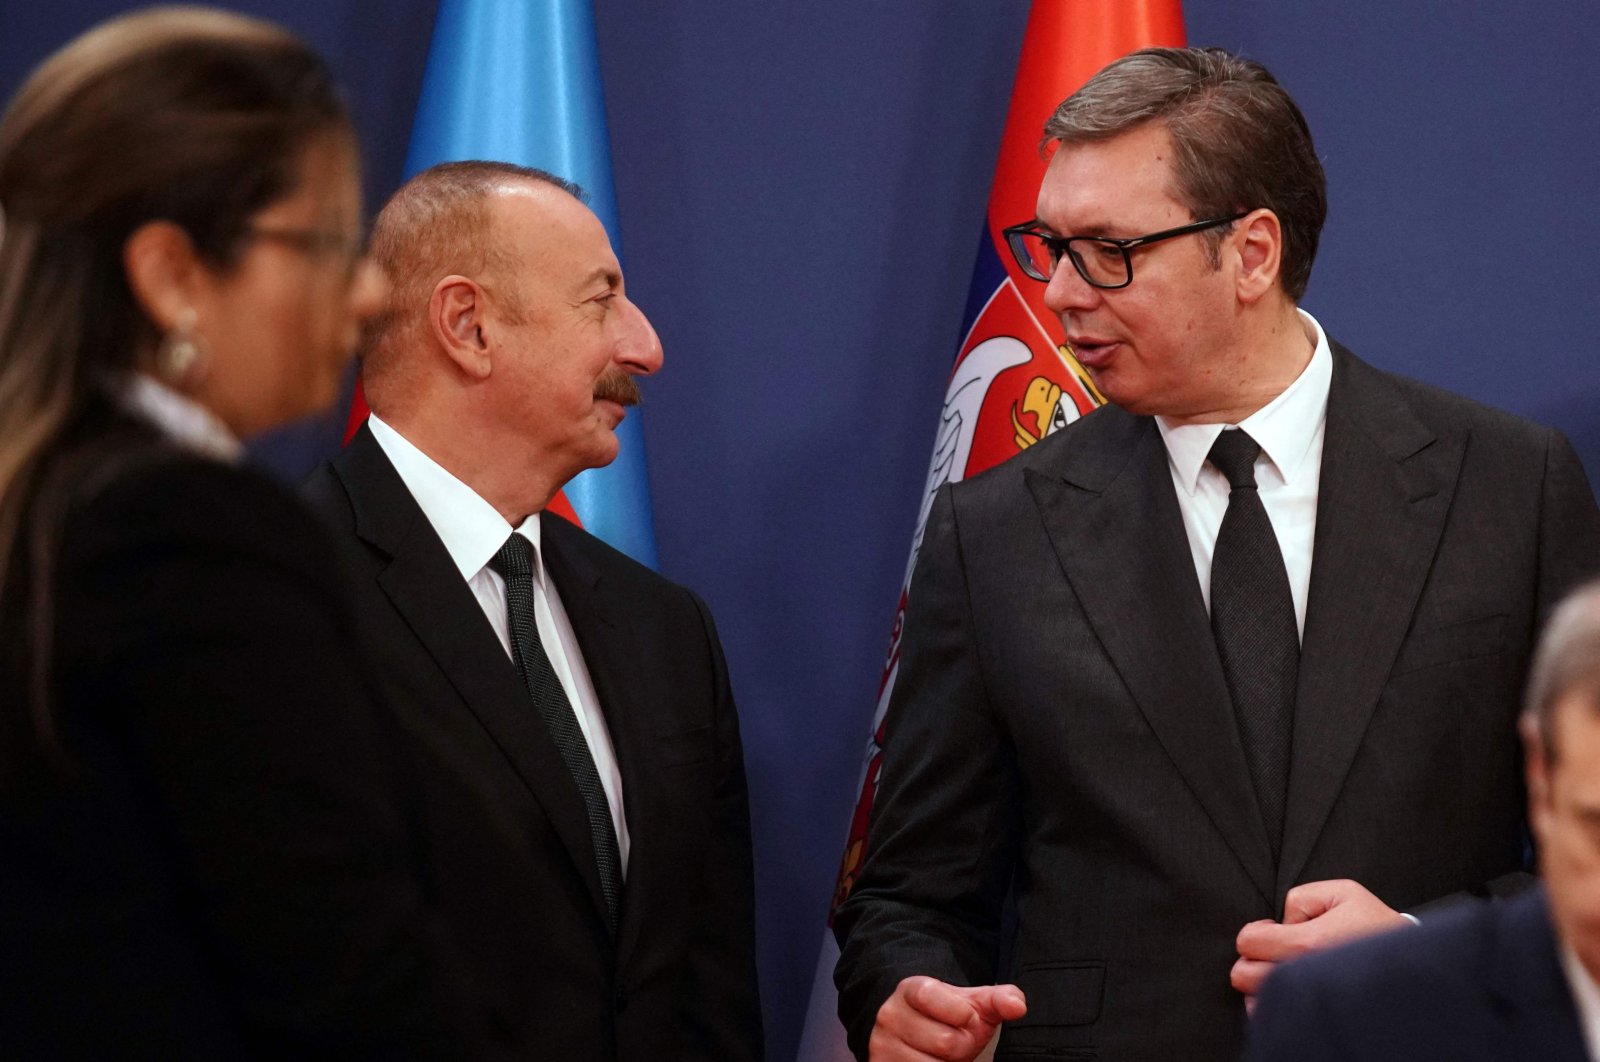 Serbian President Aleksandar Vucic (R) talks with his Azerbaijani counterpart Ilham Aliyev on the sidelines of a press conference at the Palace Of Serbia in Belgrade, Serbia, Nov. 23, 2022. (AFP Photo)